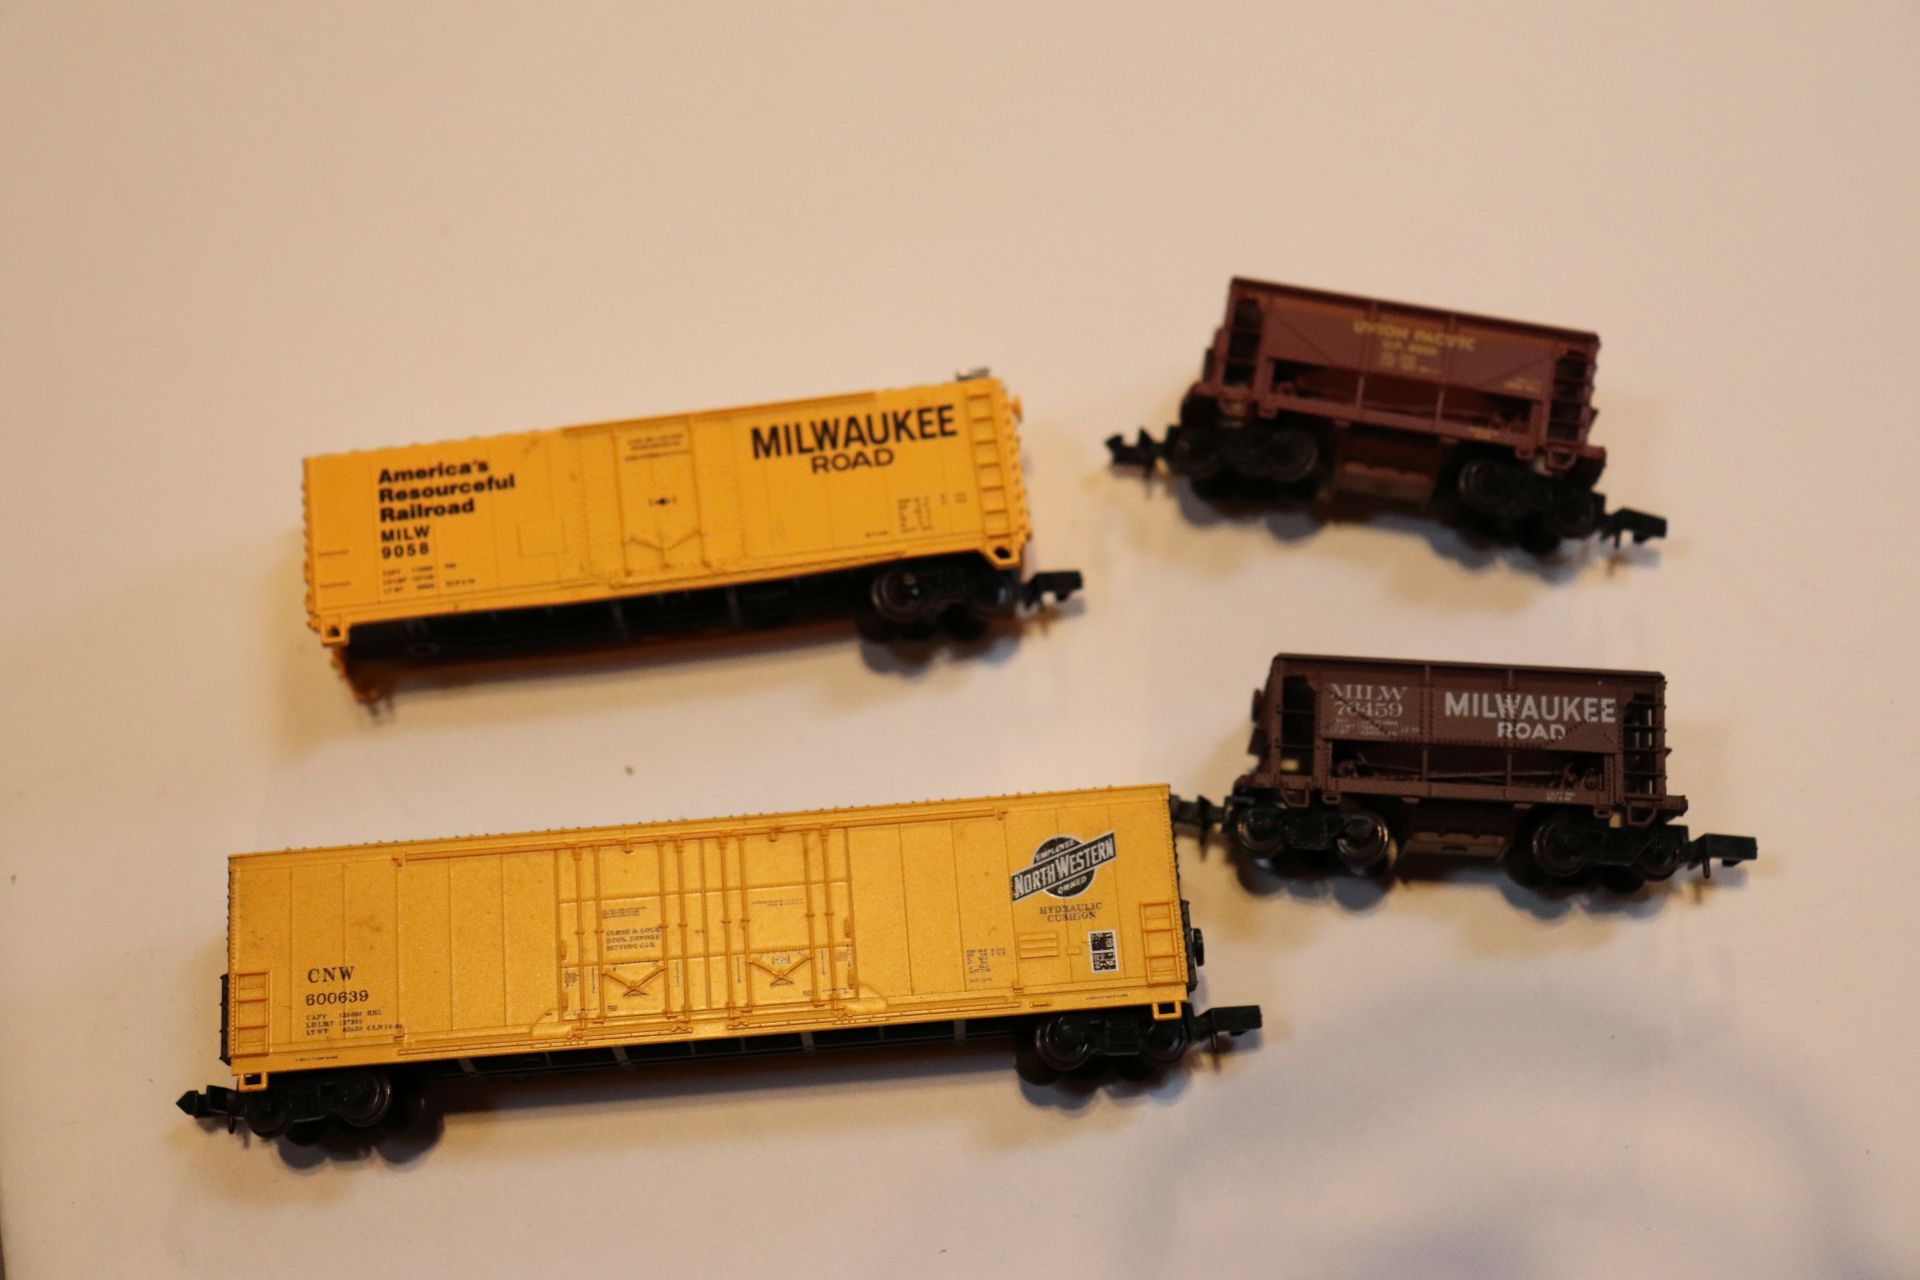 Four Milwaukee Road train cars by Atlas, N scale